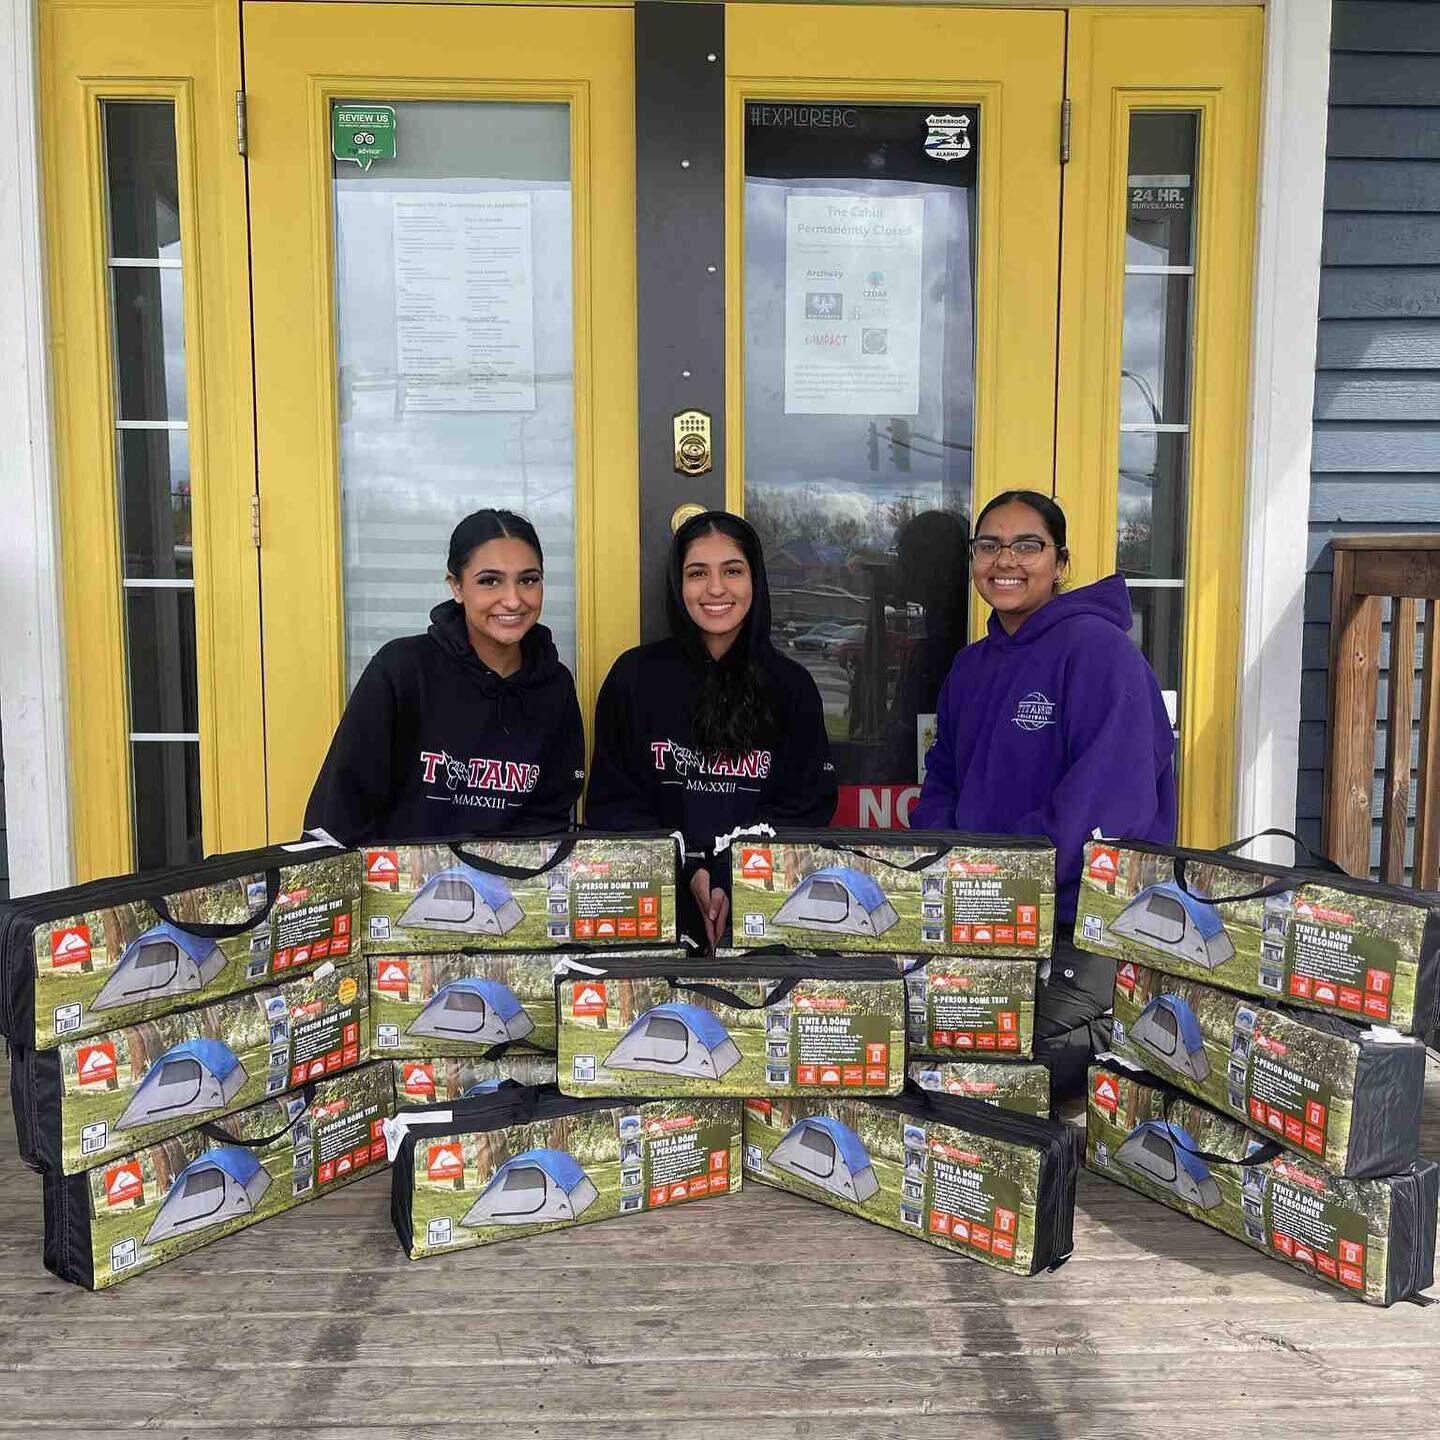 Three grade 12 students from Abbotsford Traditional Secondary School donated 15 new tents to CEDAR Outreach. ⛺️ ⛺️⛺️⛺️
They raised $700 during their doughnut-sale fundraiser to purchase the tents. 🍩🍩🍩
The fundraiser is part of their Capstone proje